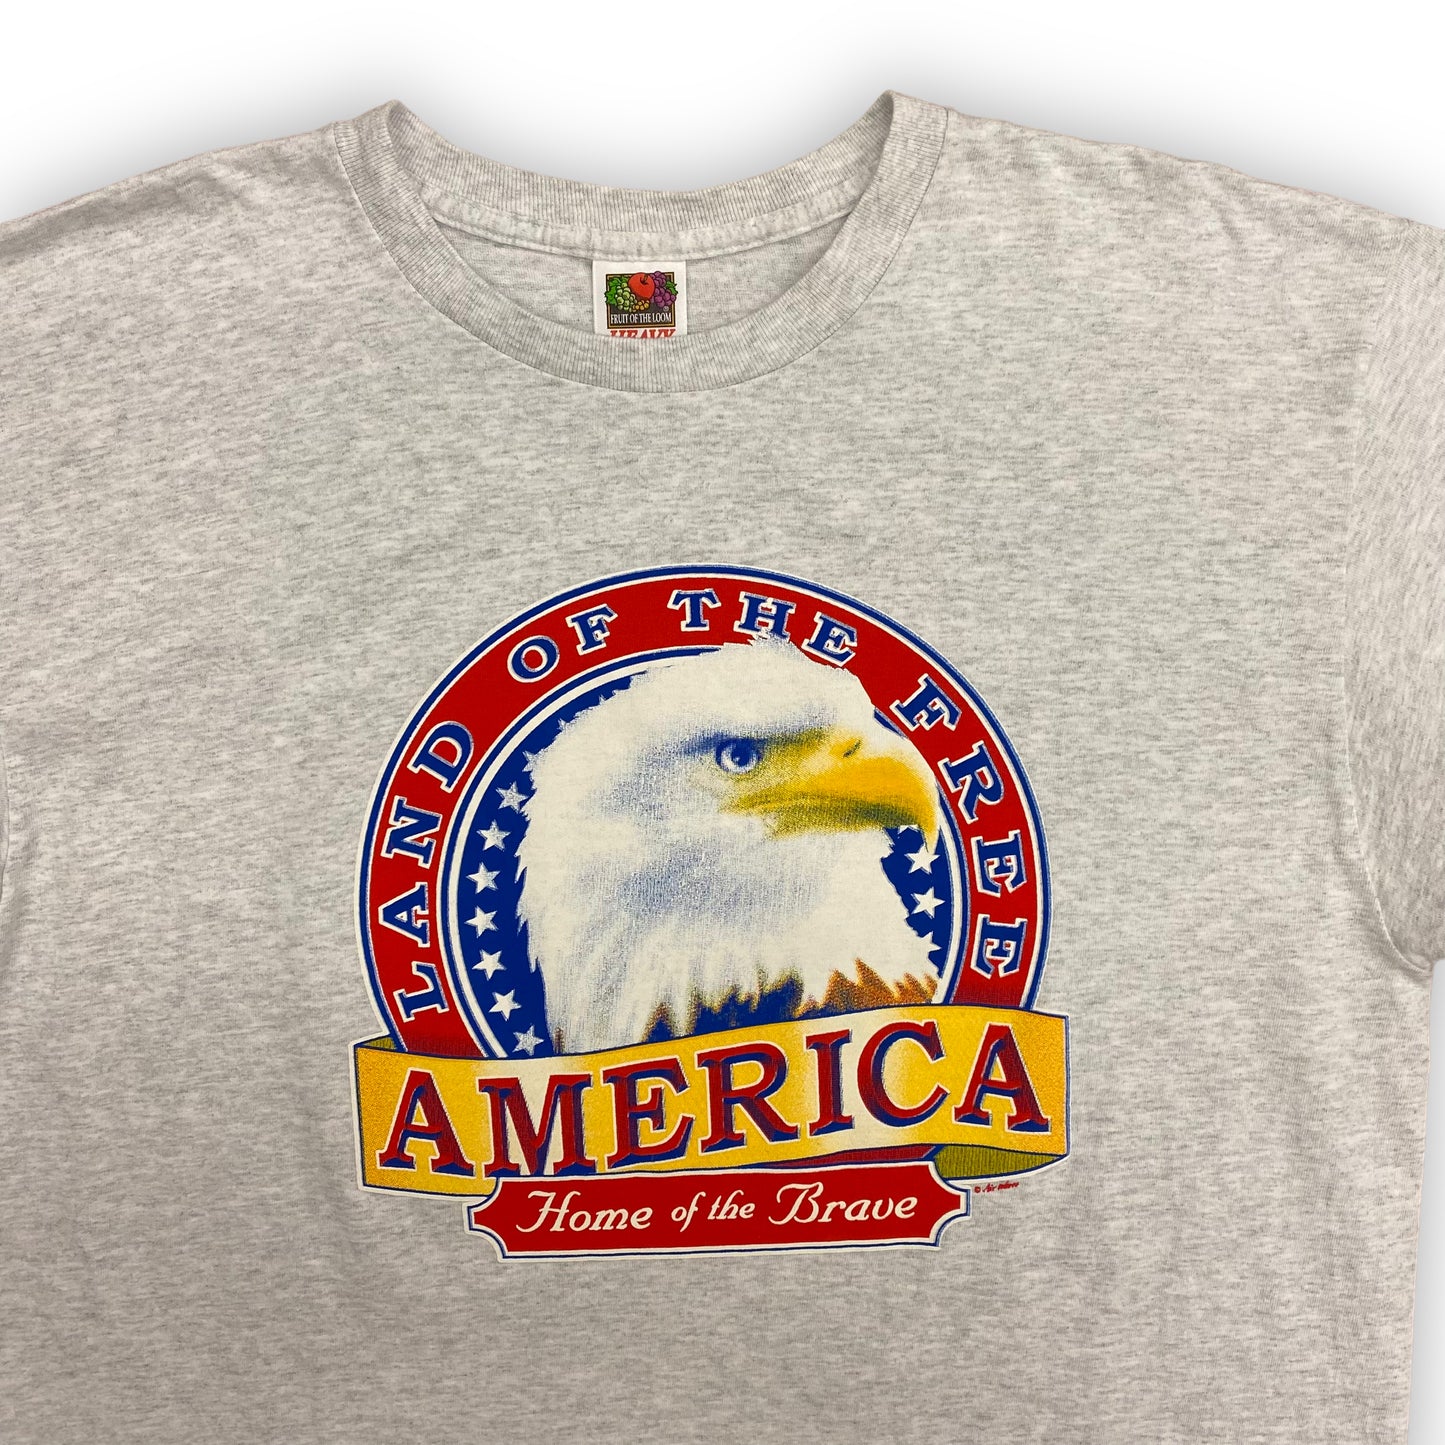 Vintage 90s America "Land of the Free - Home of the Brave" Tee - Size XL